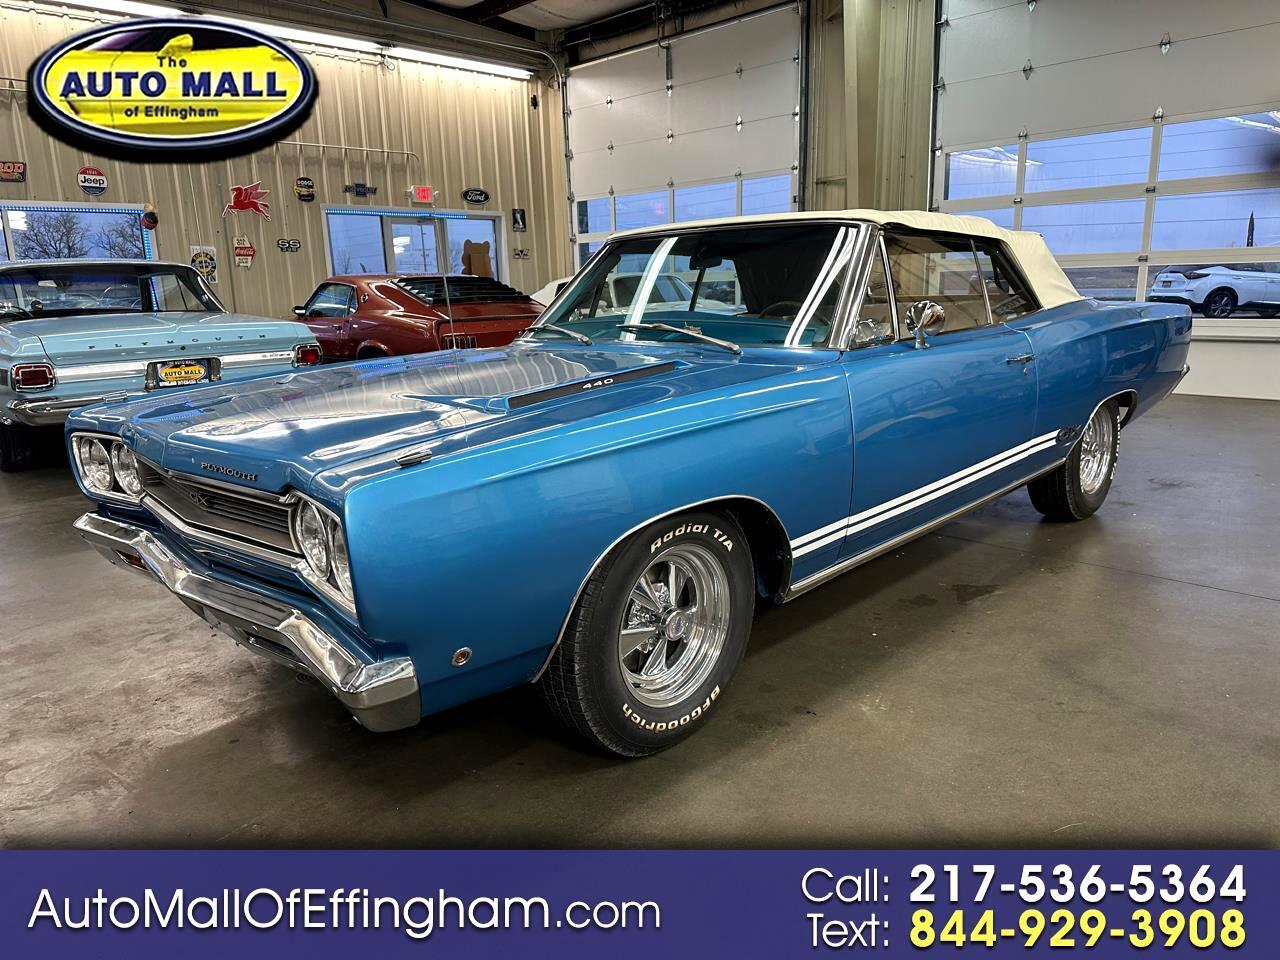 For Sale: 1968 Plymouth Satellite in Effingham, Illinois for sale in Effingham, IL